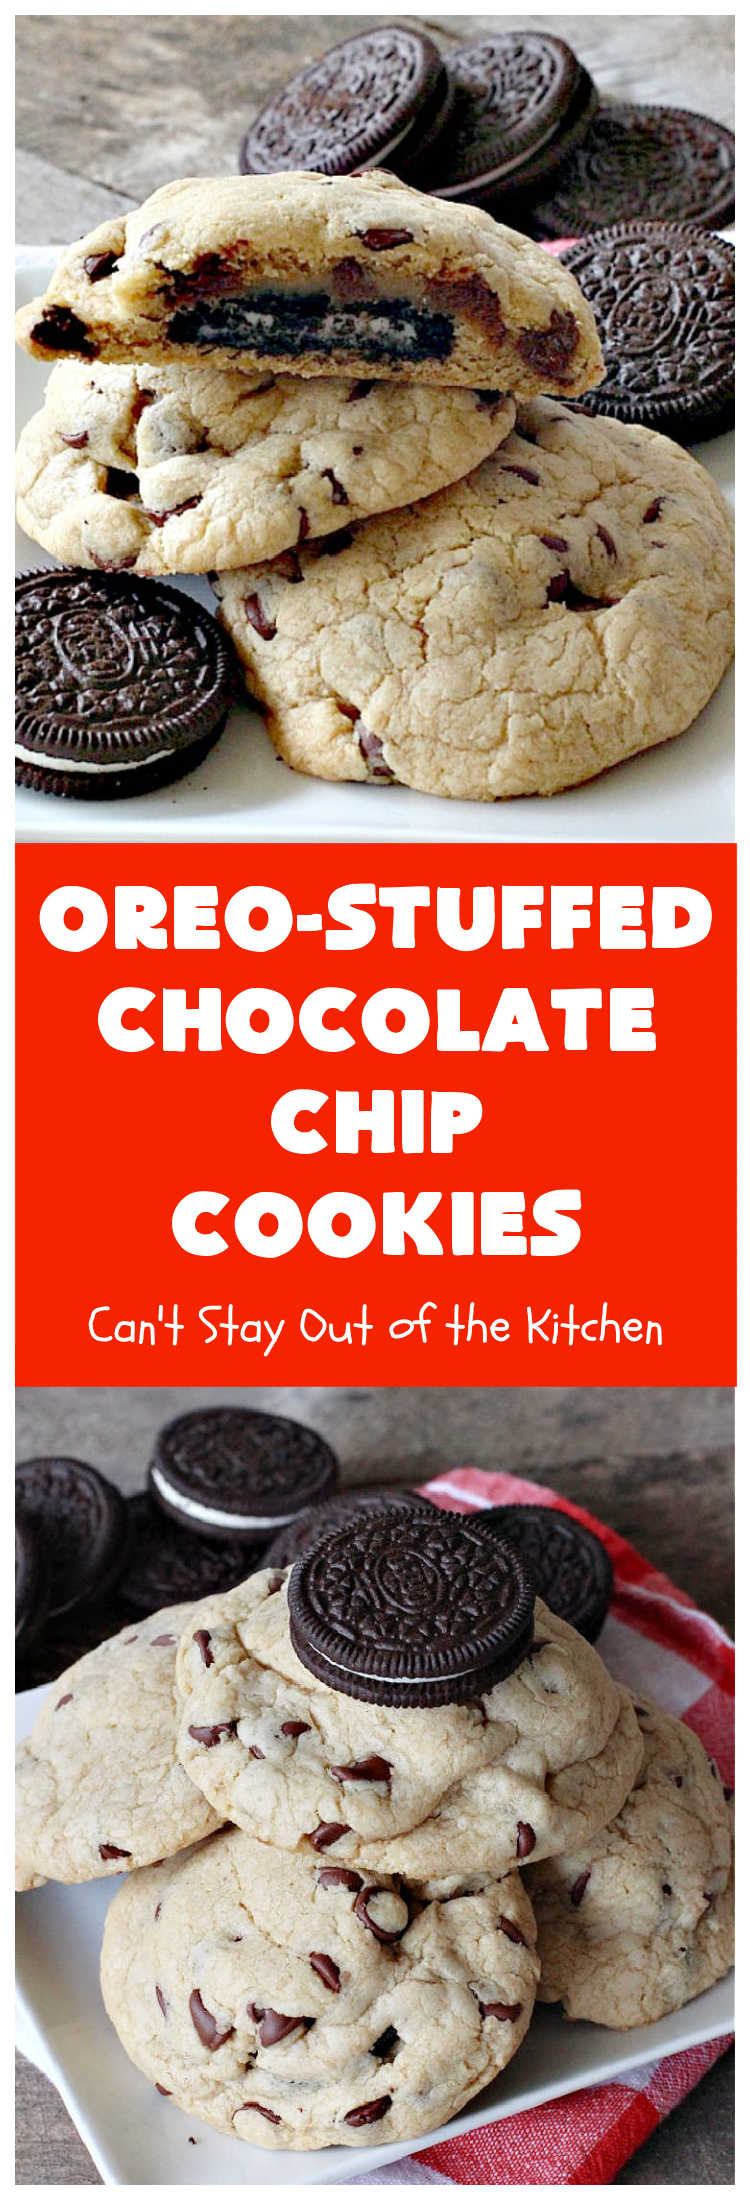 Oreo-Stuffed Chocolate Chip Cookies | Can't Stay Out of the Kitchen | these sensational #ChocolateChipCookies have an #Oreo buried in each #cookie! They're so rich & decadent you'll be drooling after the first bite! Perfect for #ChristmasCookie Exchanges & #holiday parties. If you enjoy #OreoCookies you'll rave over this fantastic #dessert. #OreoDessert #ChocolateDessert #OreoStuffedChocolateChipCookies